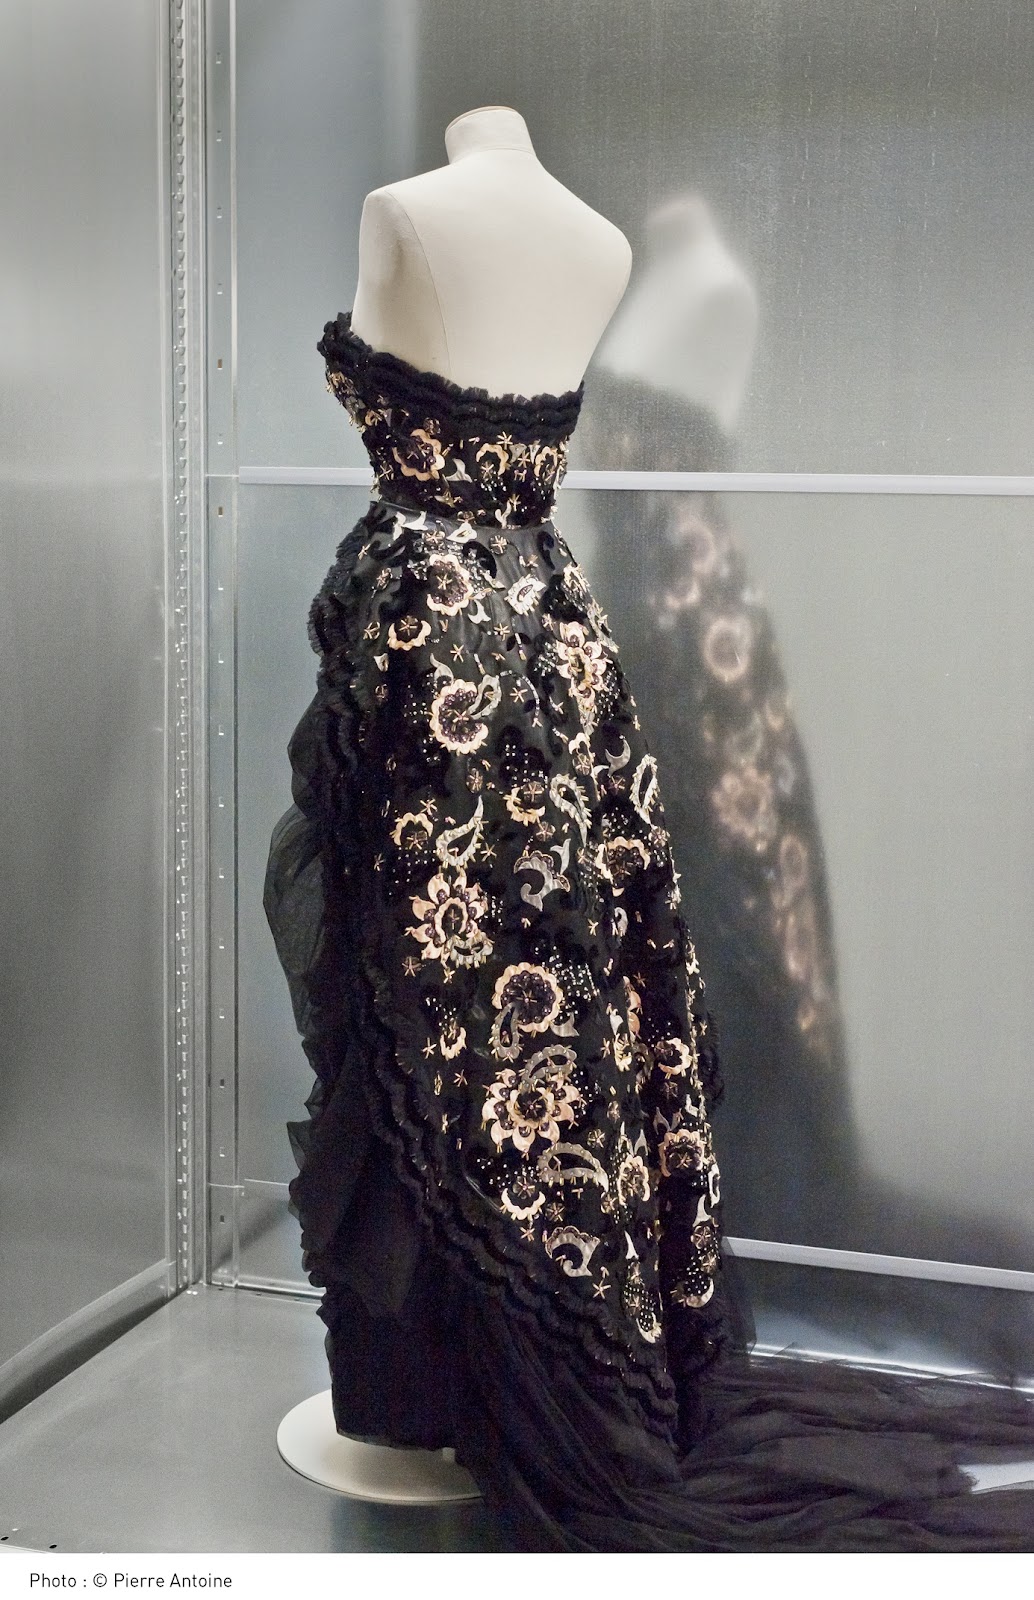 Visit the Cristóbal Balenciaga Museum, homage to a master of couture.